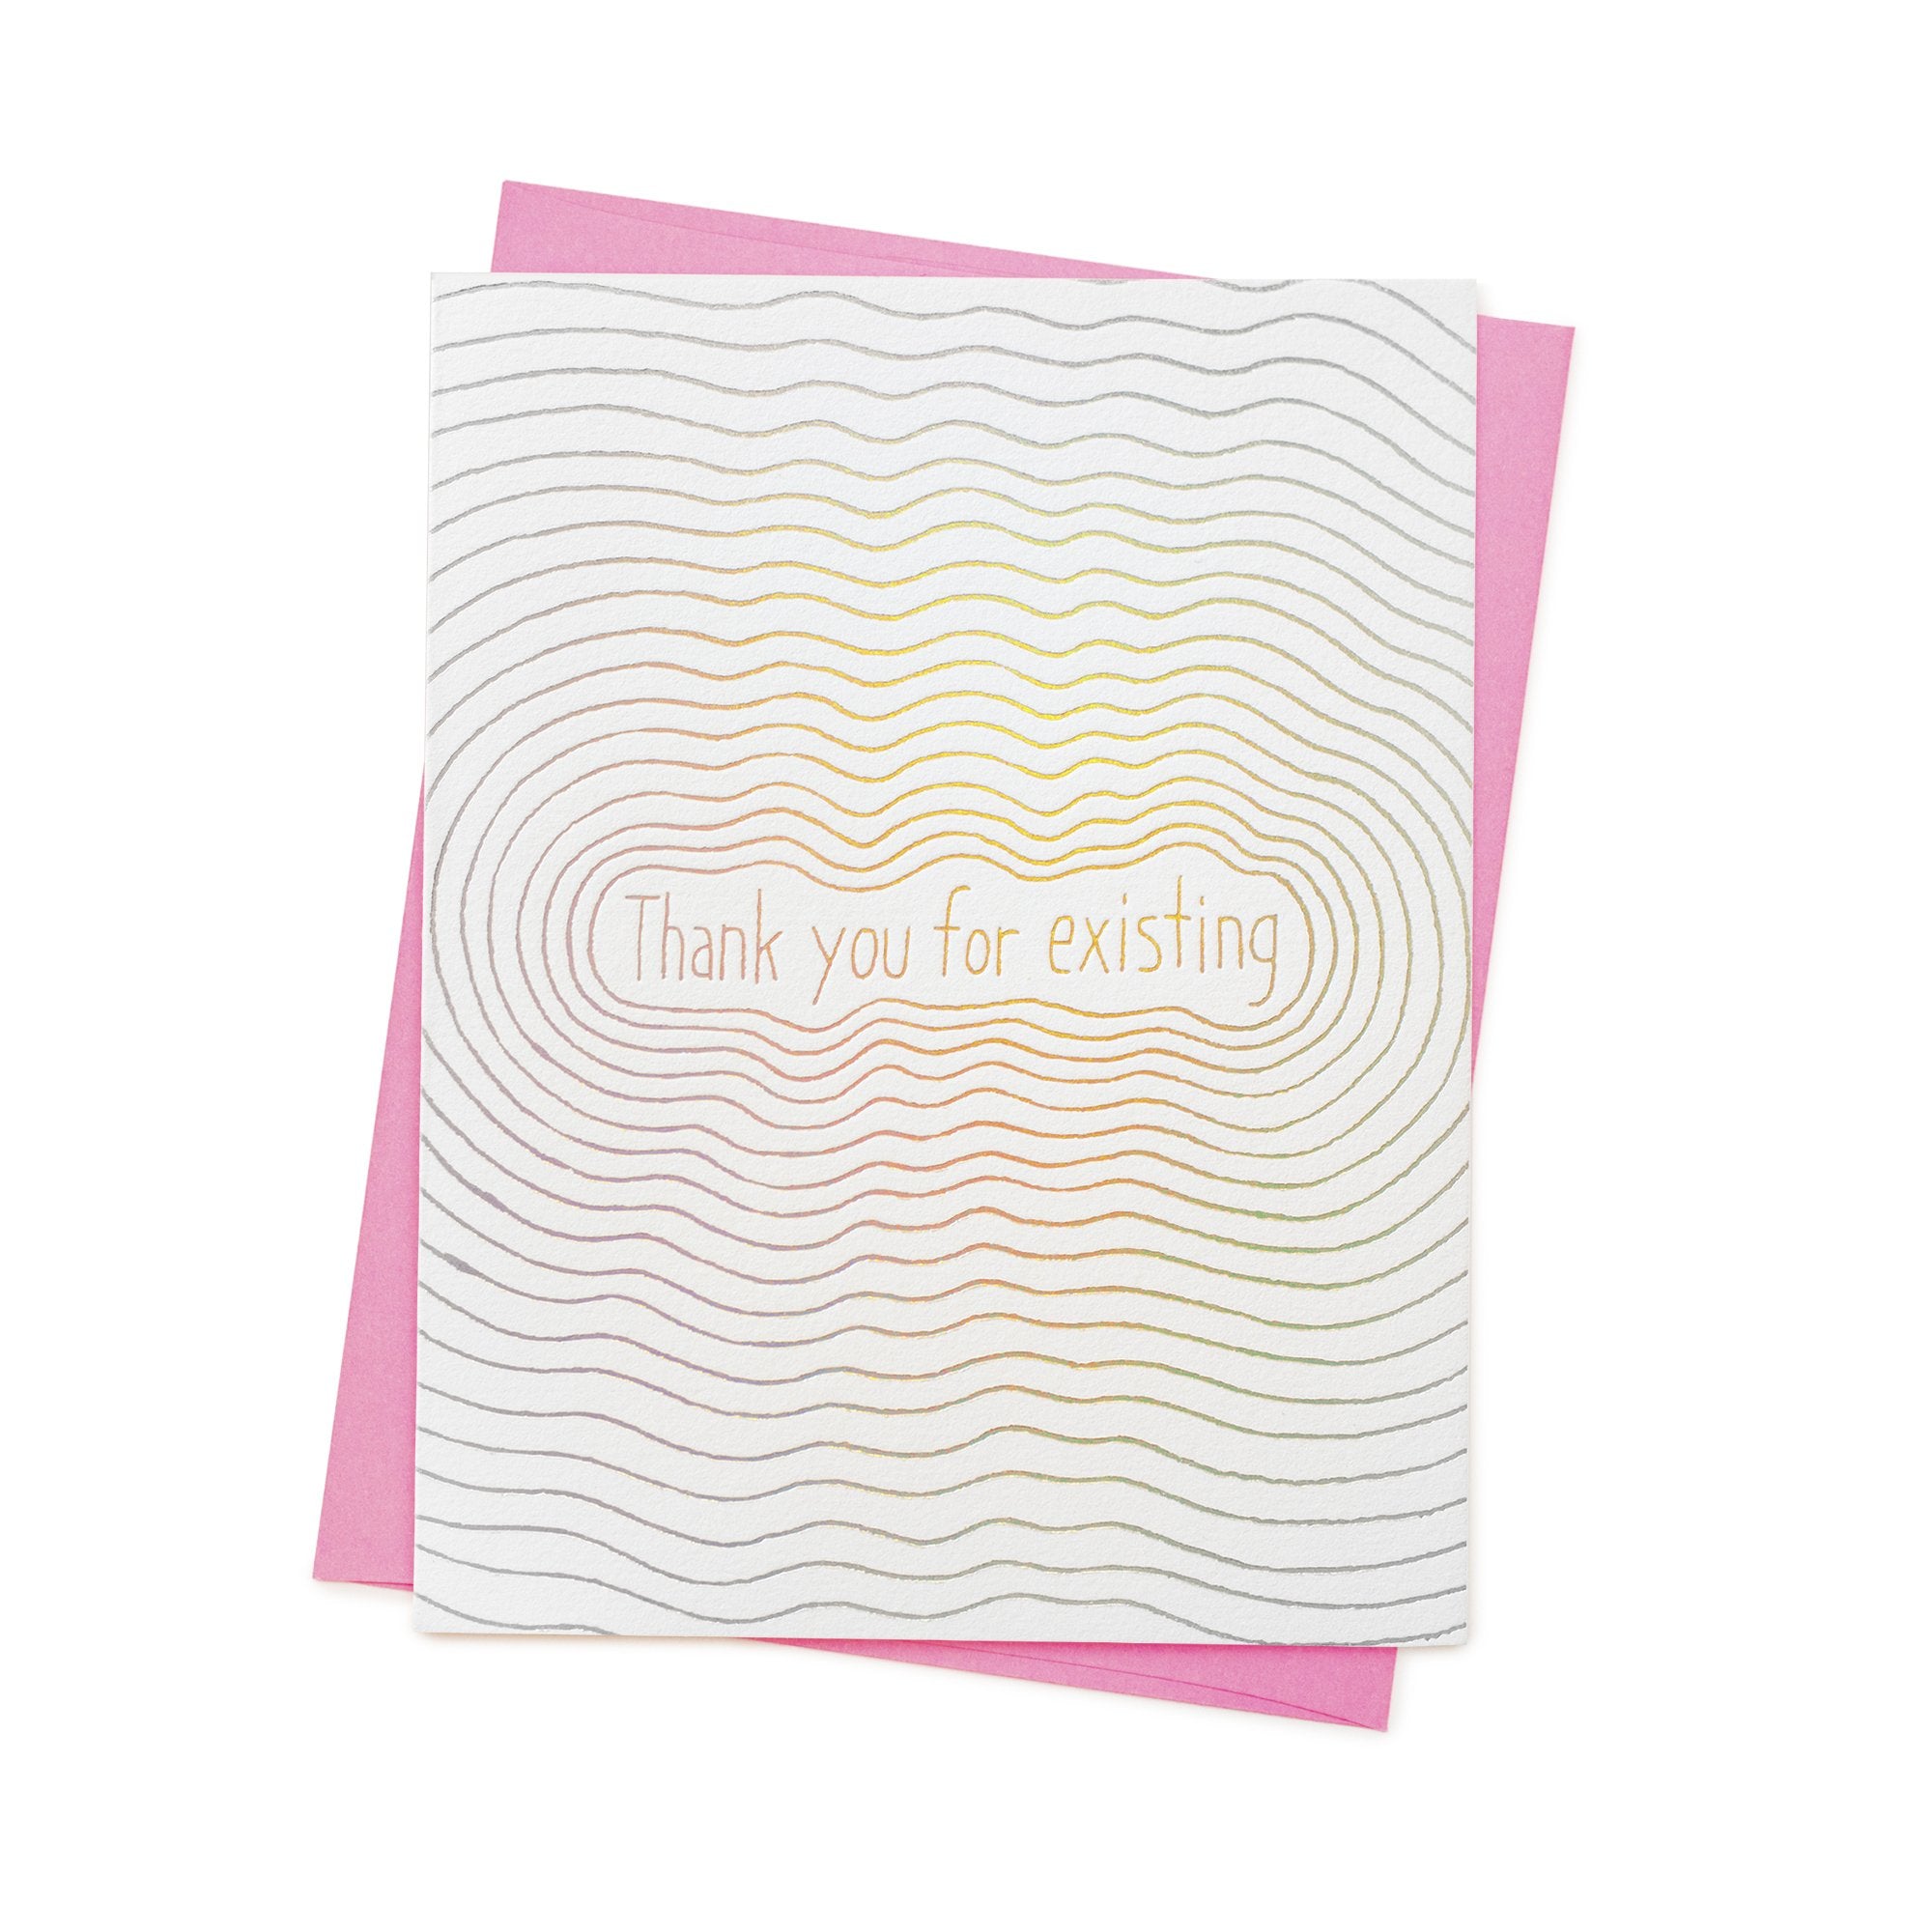 Thank You for Existing Greeting Card - 1973 by Ashkahn